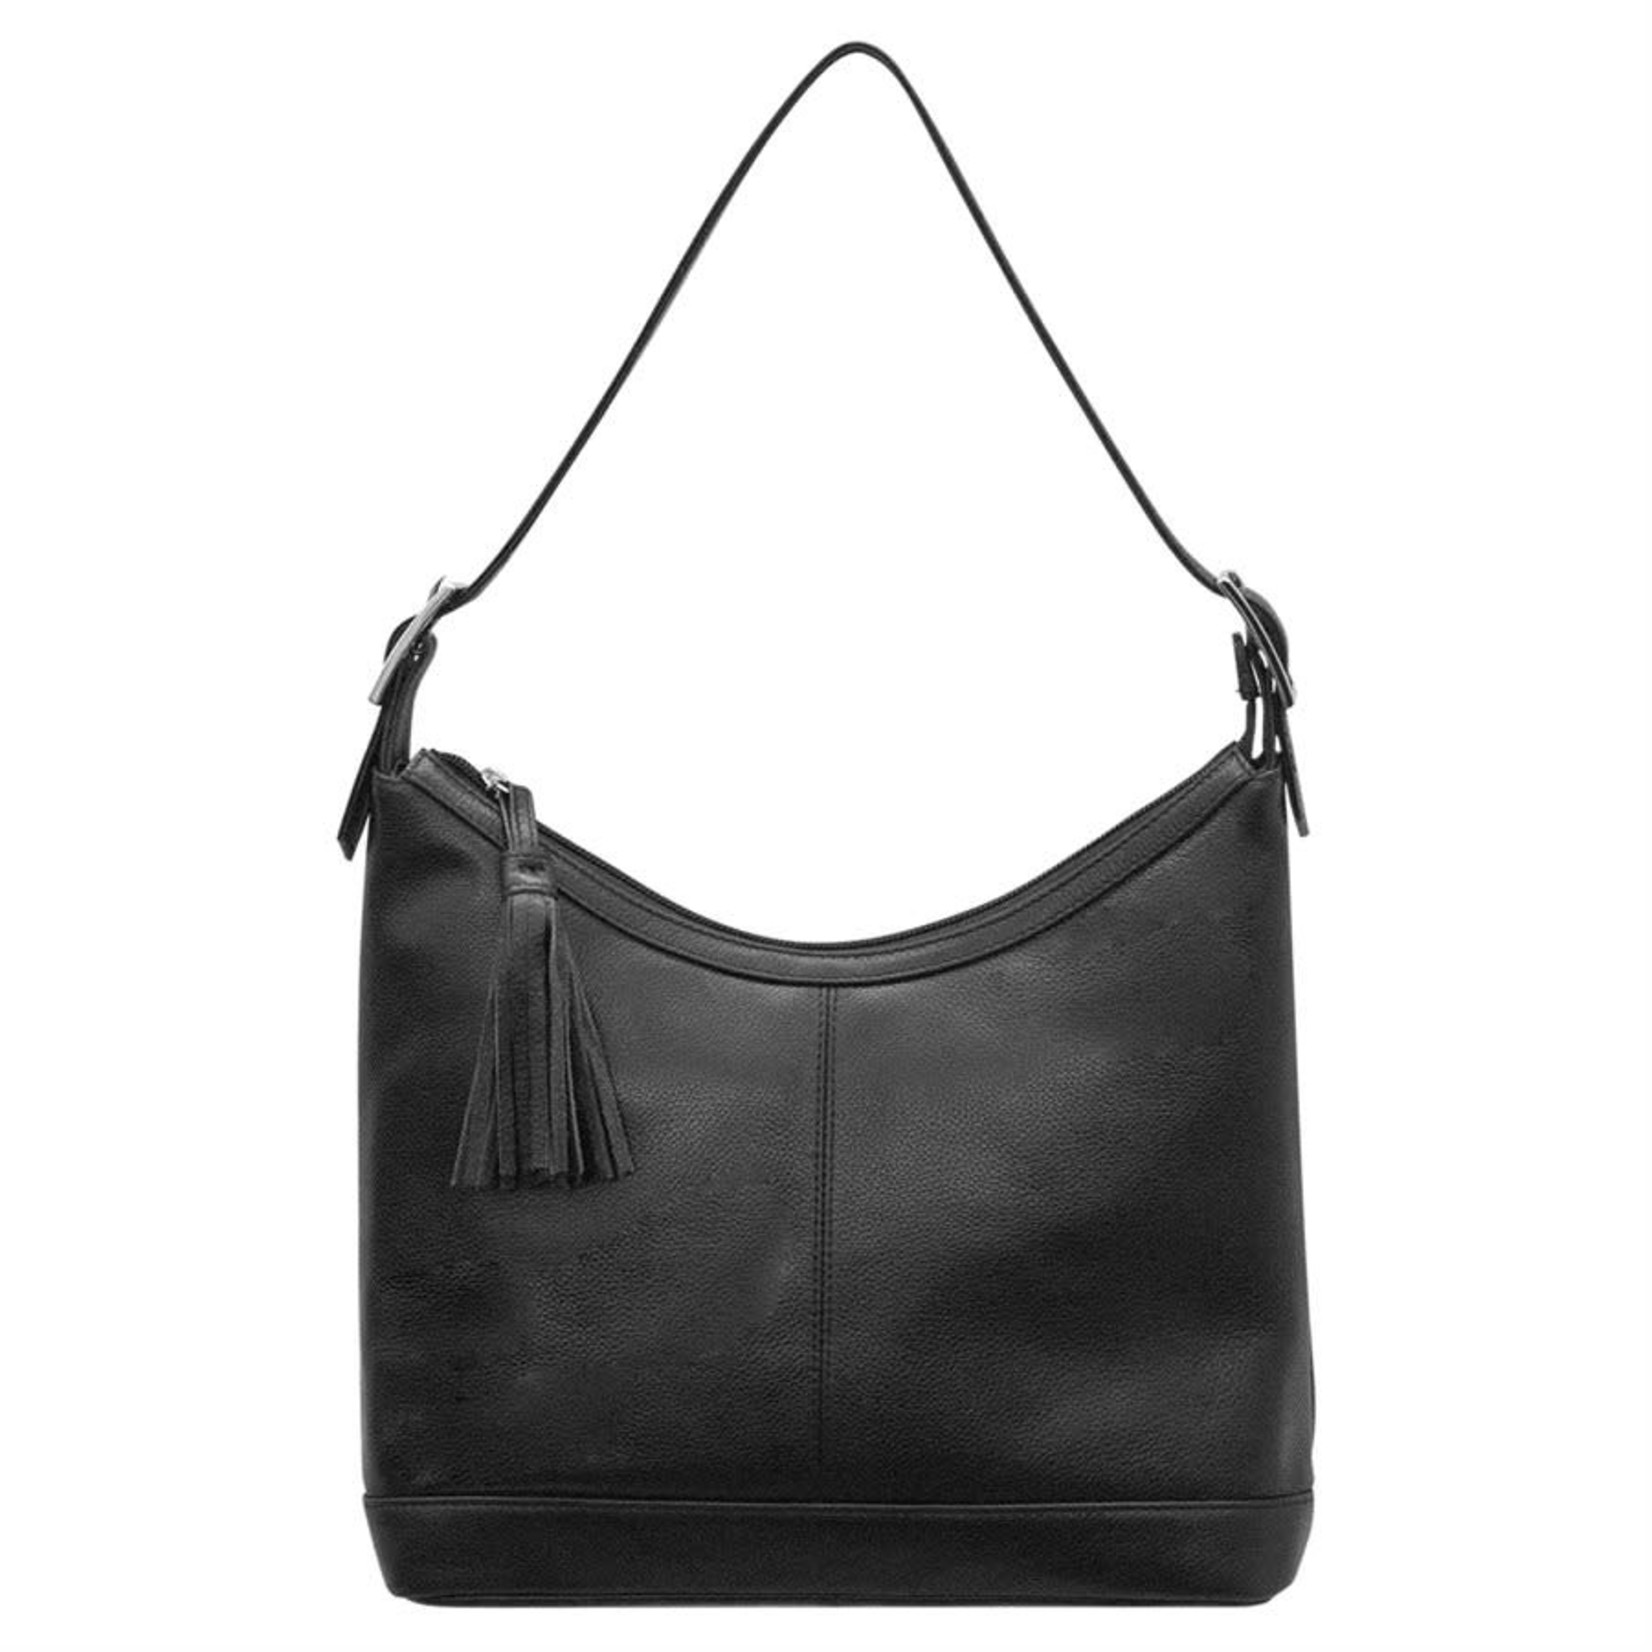 Leather Handbags and Accessories 6924 Black - Classic Leather Hobo